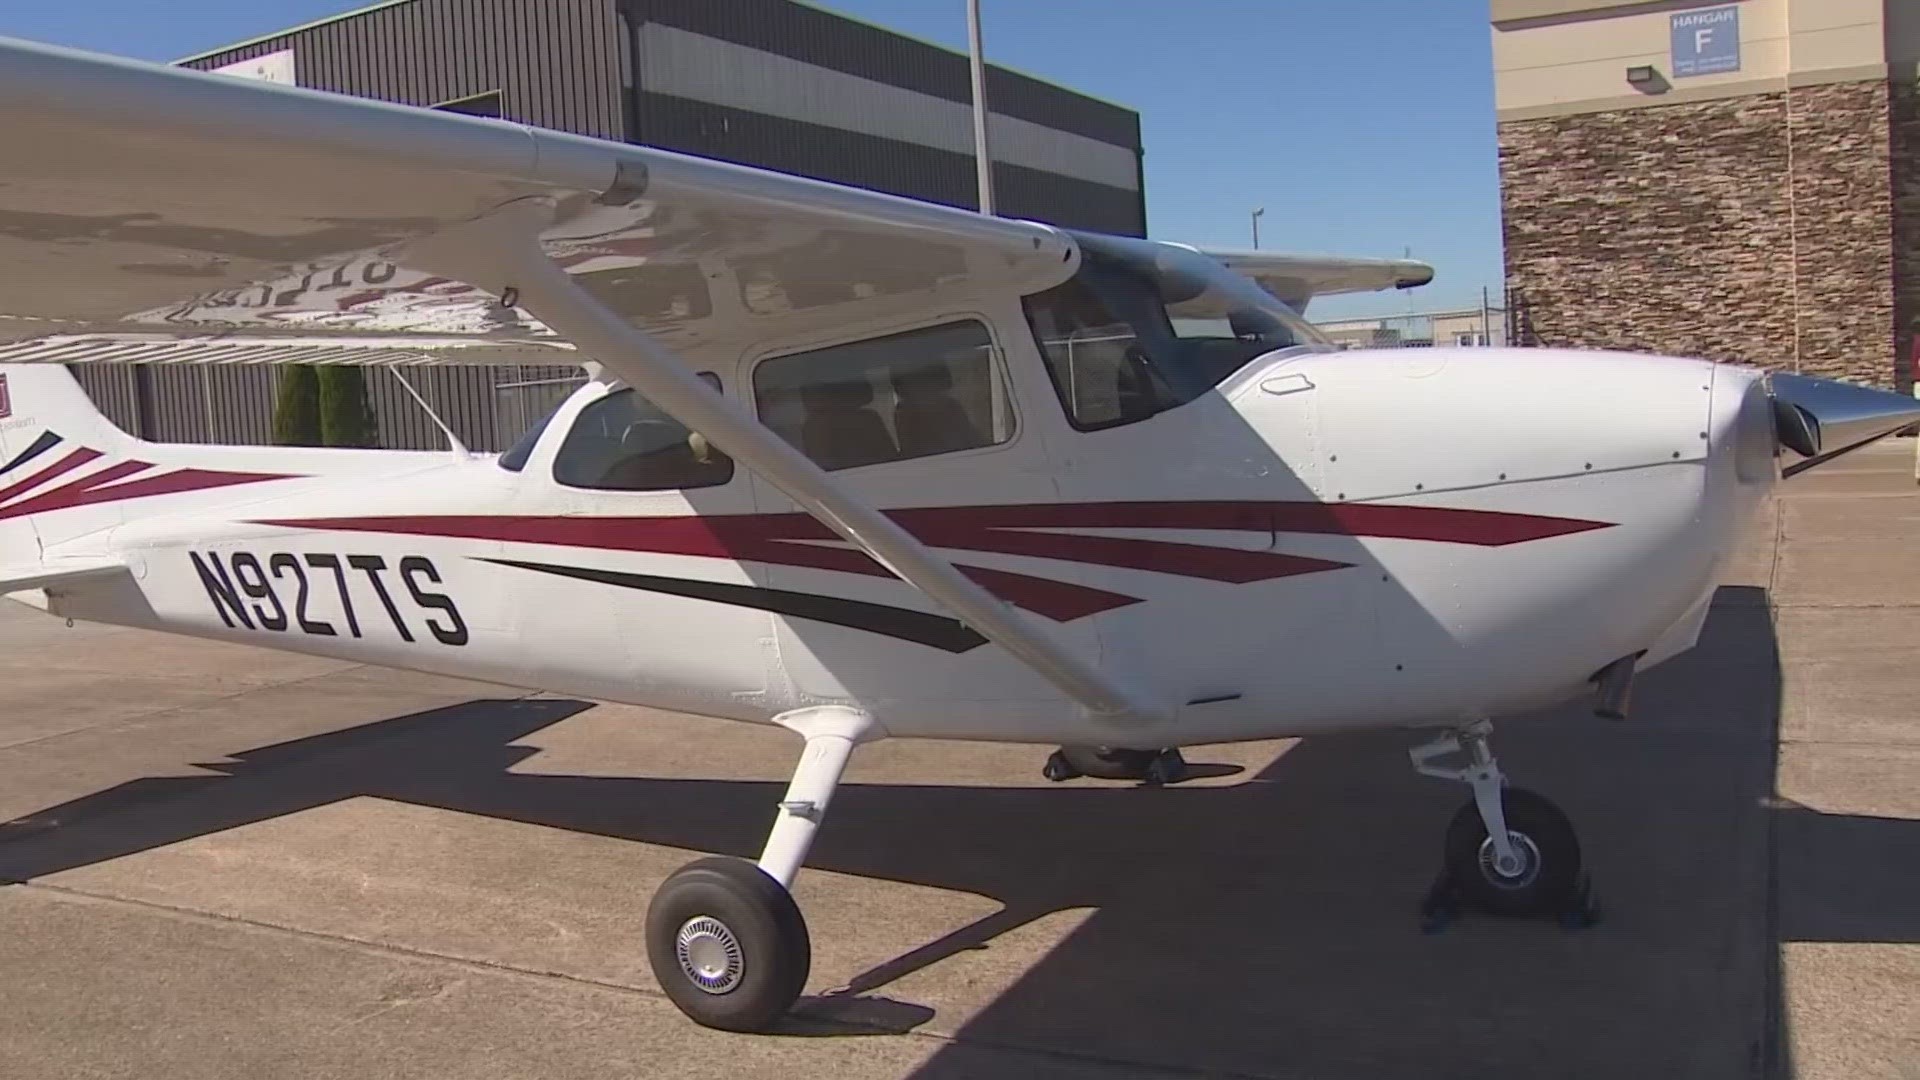 It’s the latest aircraft to join its fleet of eight, but the first time the university has purchased a new airplane.